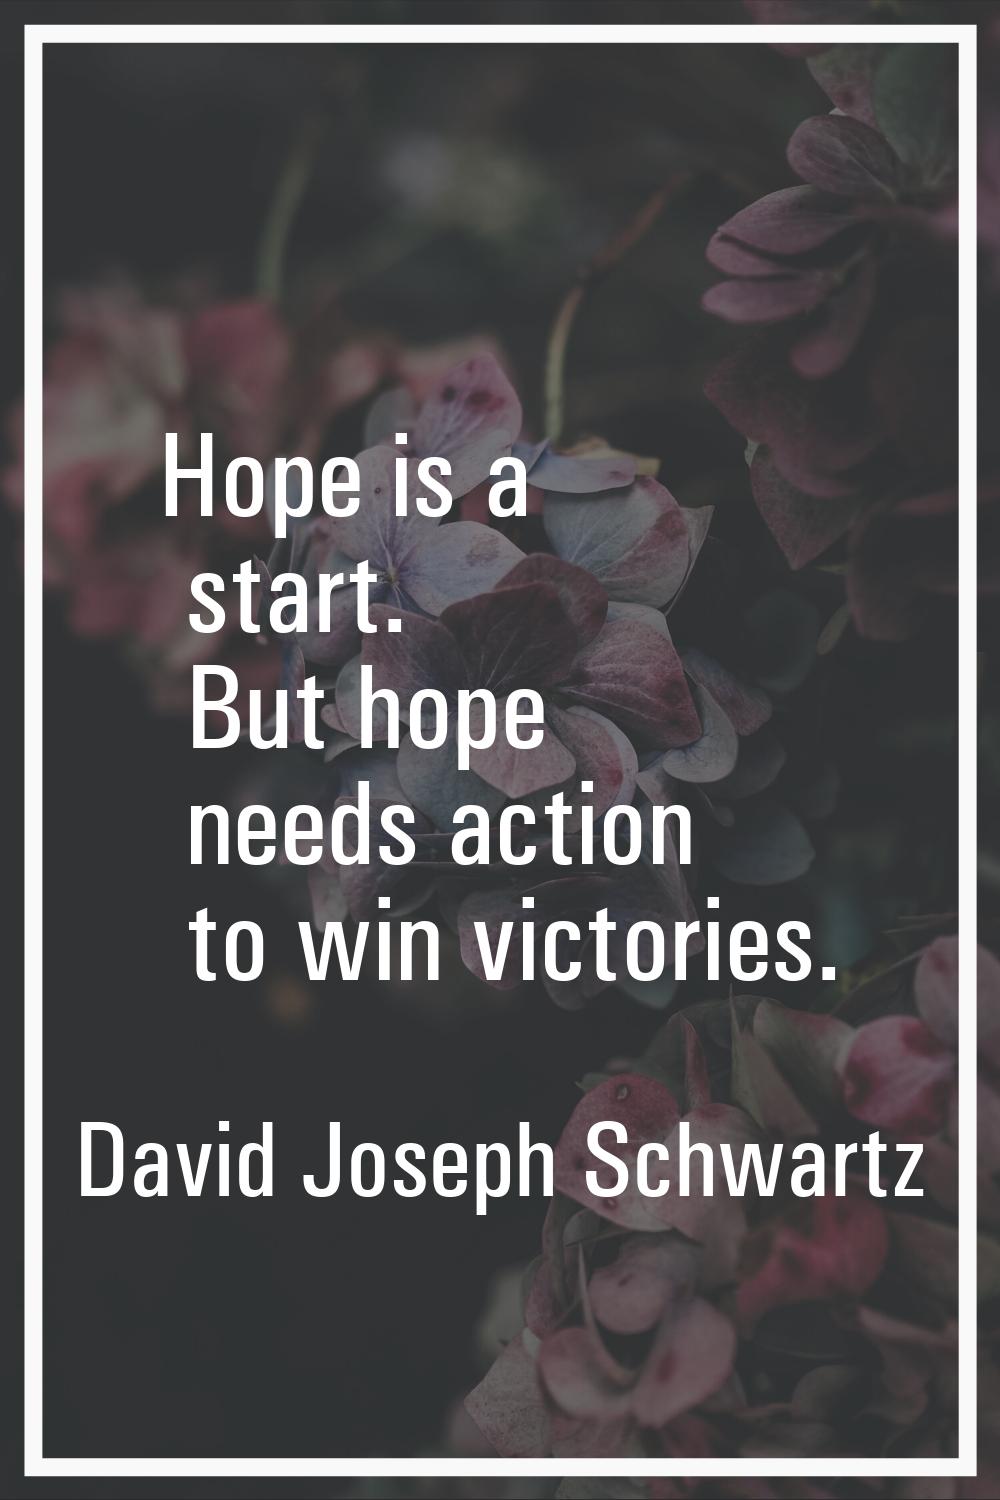 Hope is a start. But hope needs action to win victories.